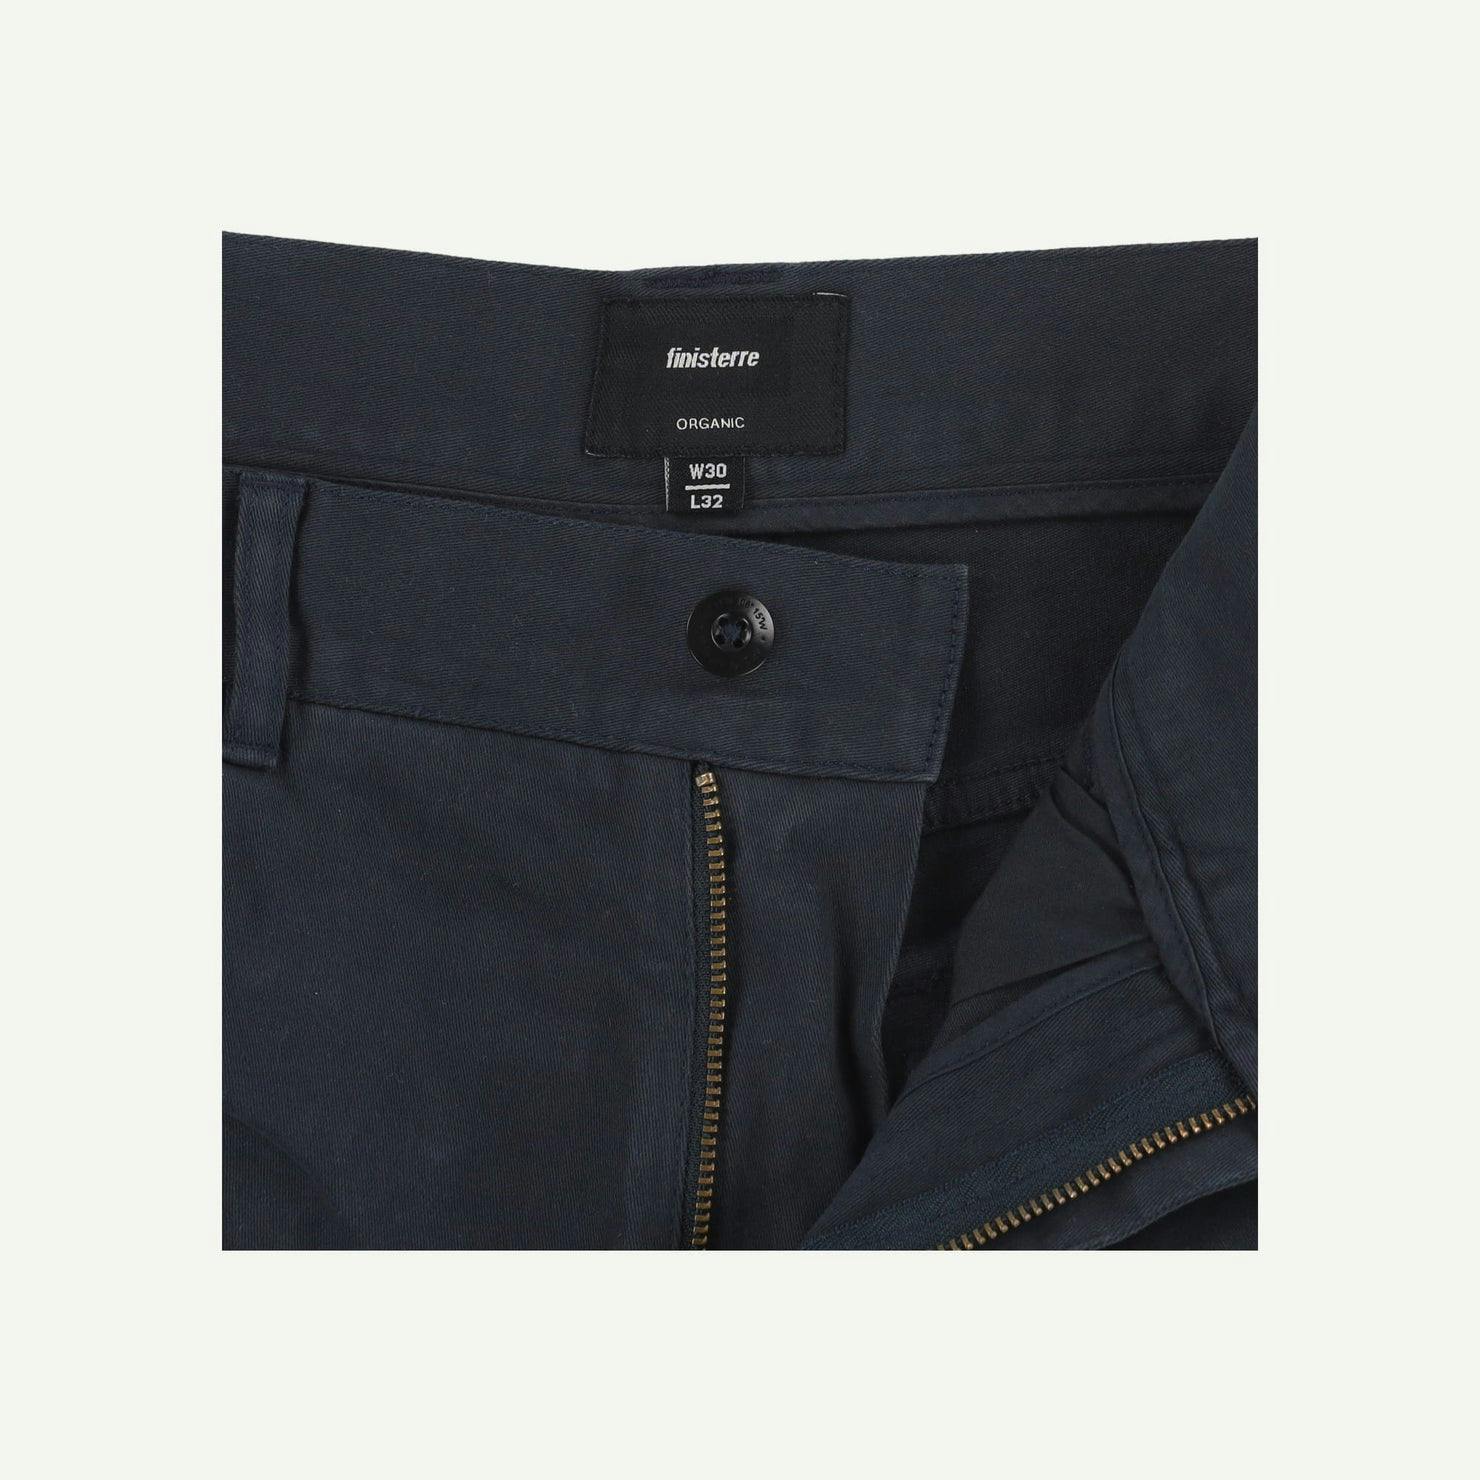 Finisterre Repaired Navy Trousers